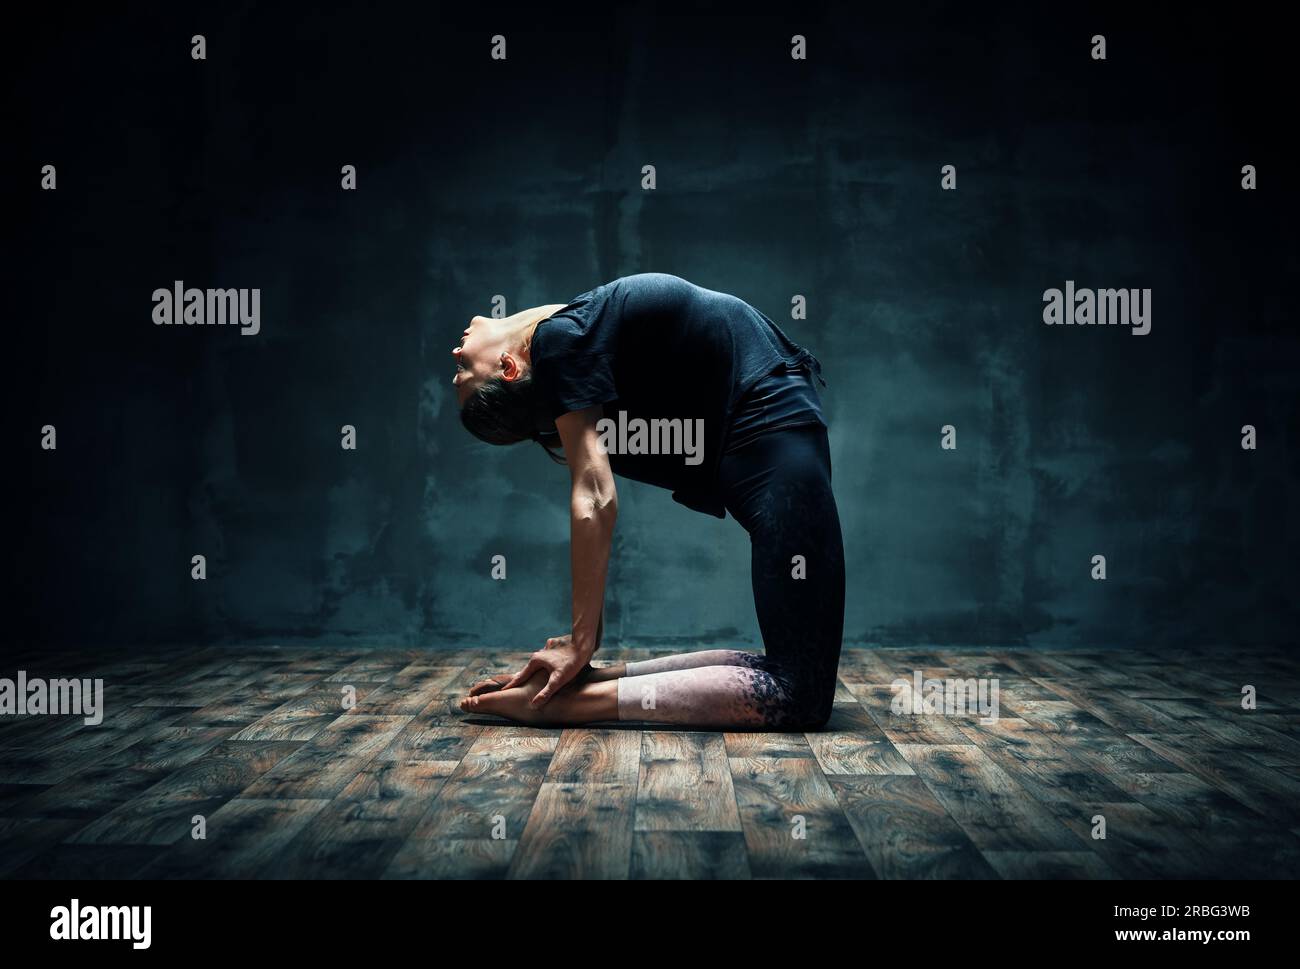 Young smiling woman in one hand Ustrasana camel yoga pose. Slim